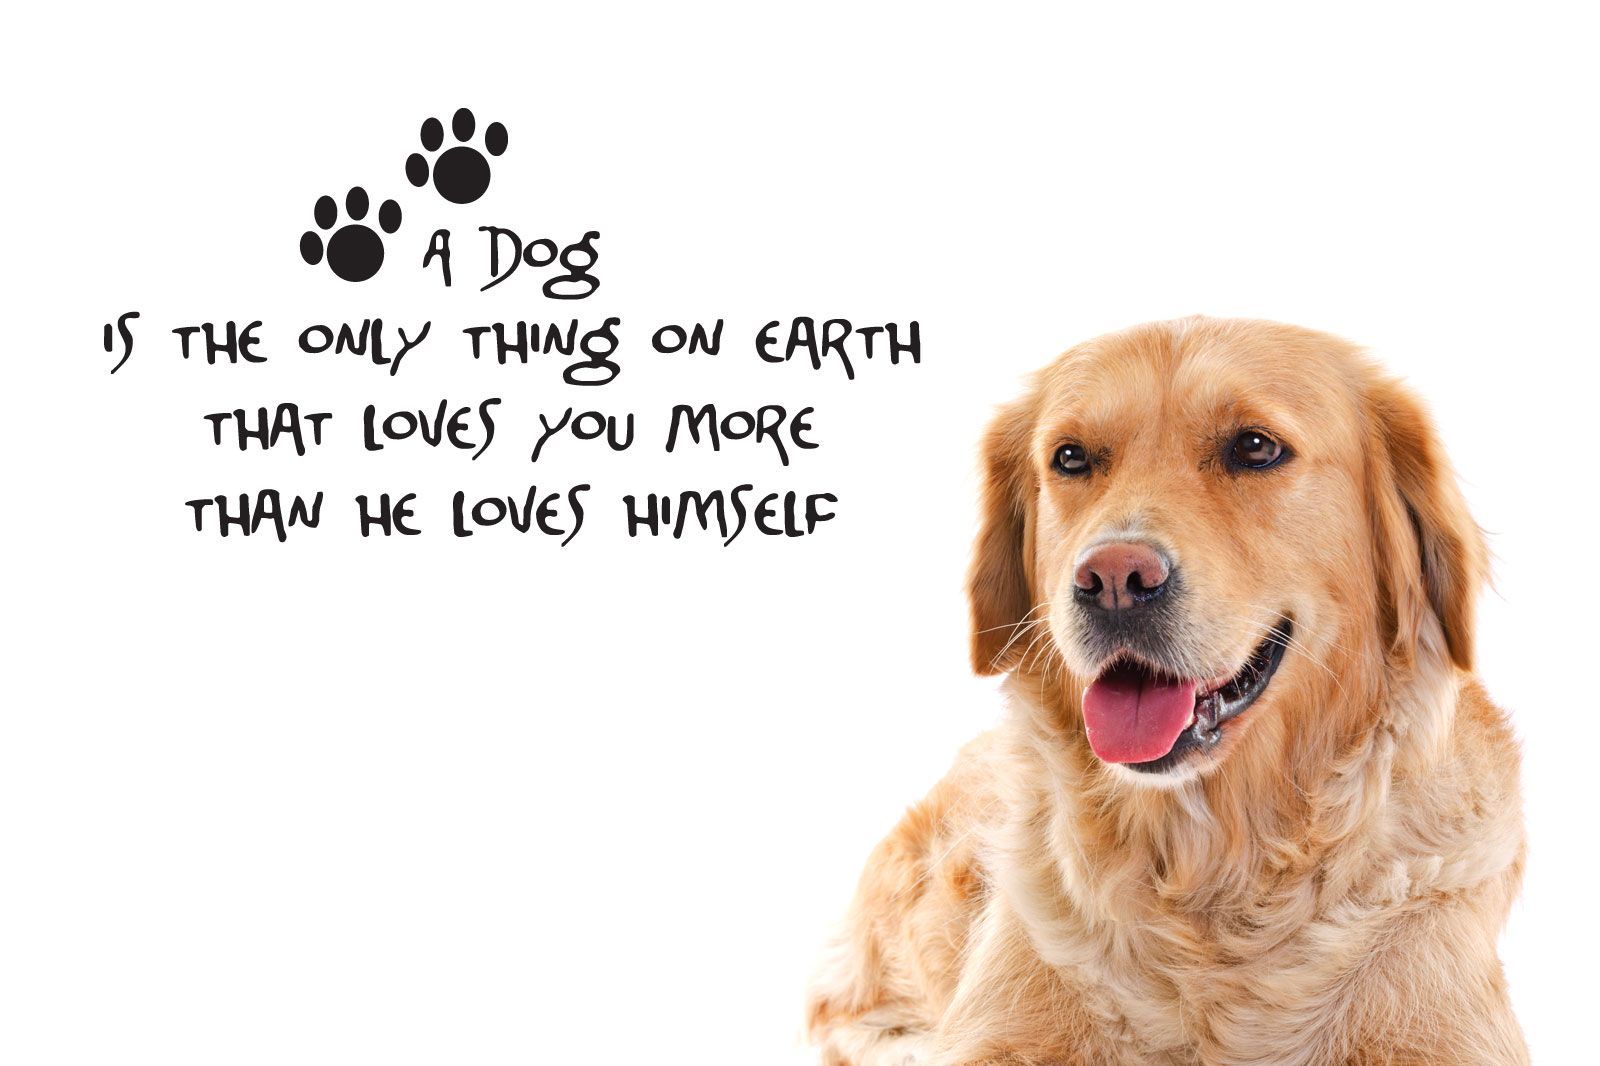 Elegant Dog Love Quotes and Sayings. Love quotes collection within HD image